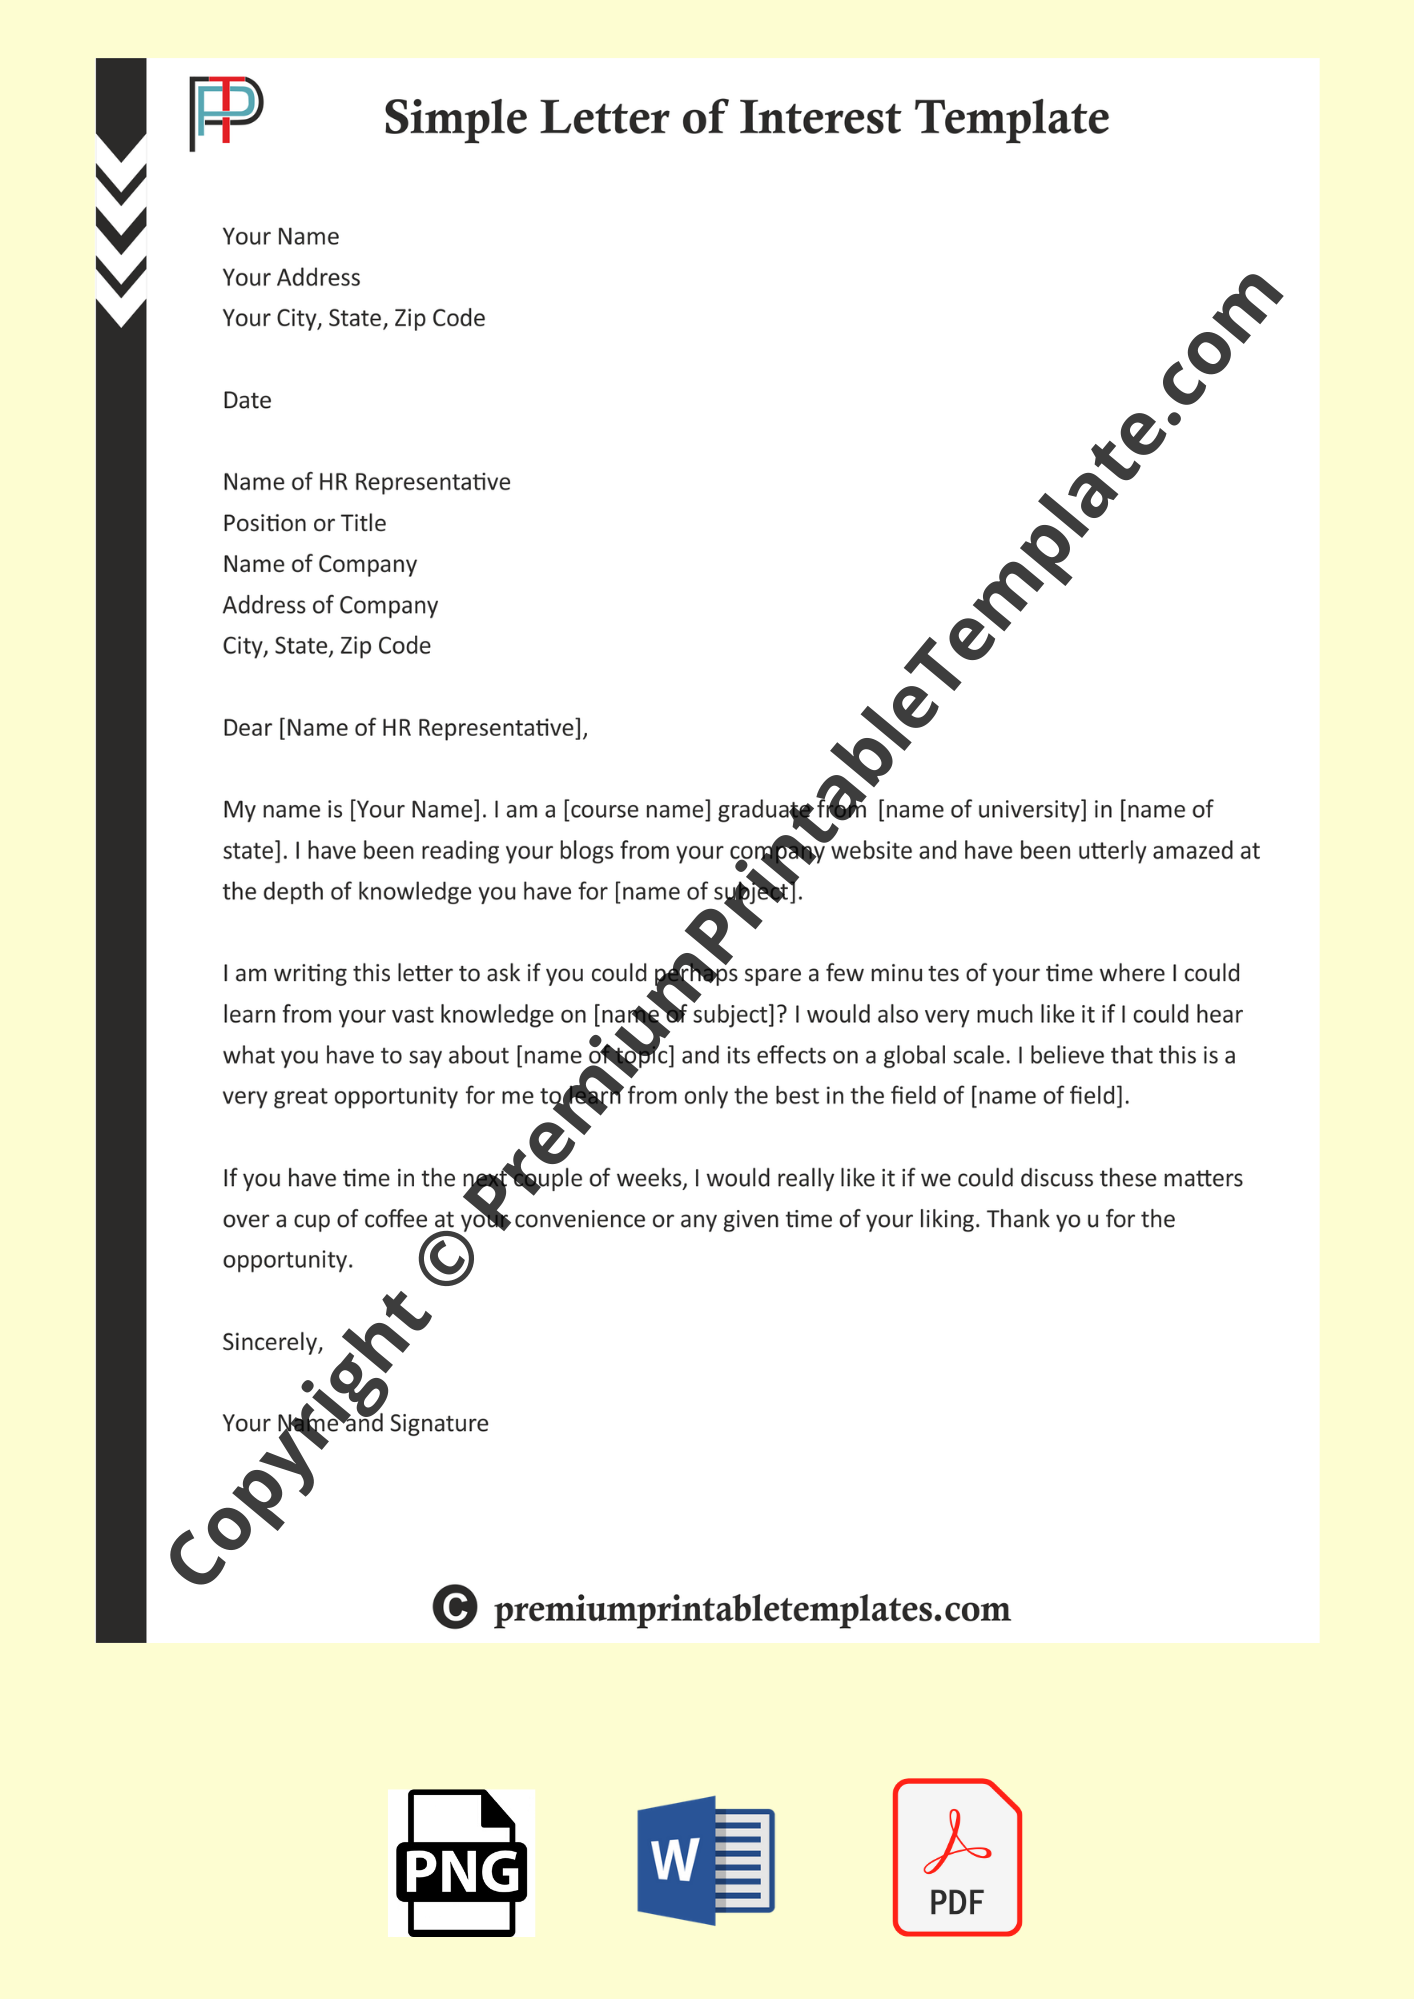 Template For Letter Of Interest from premiumprintabletemplates.com